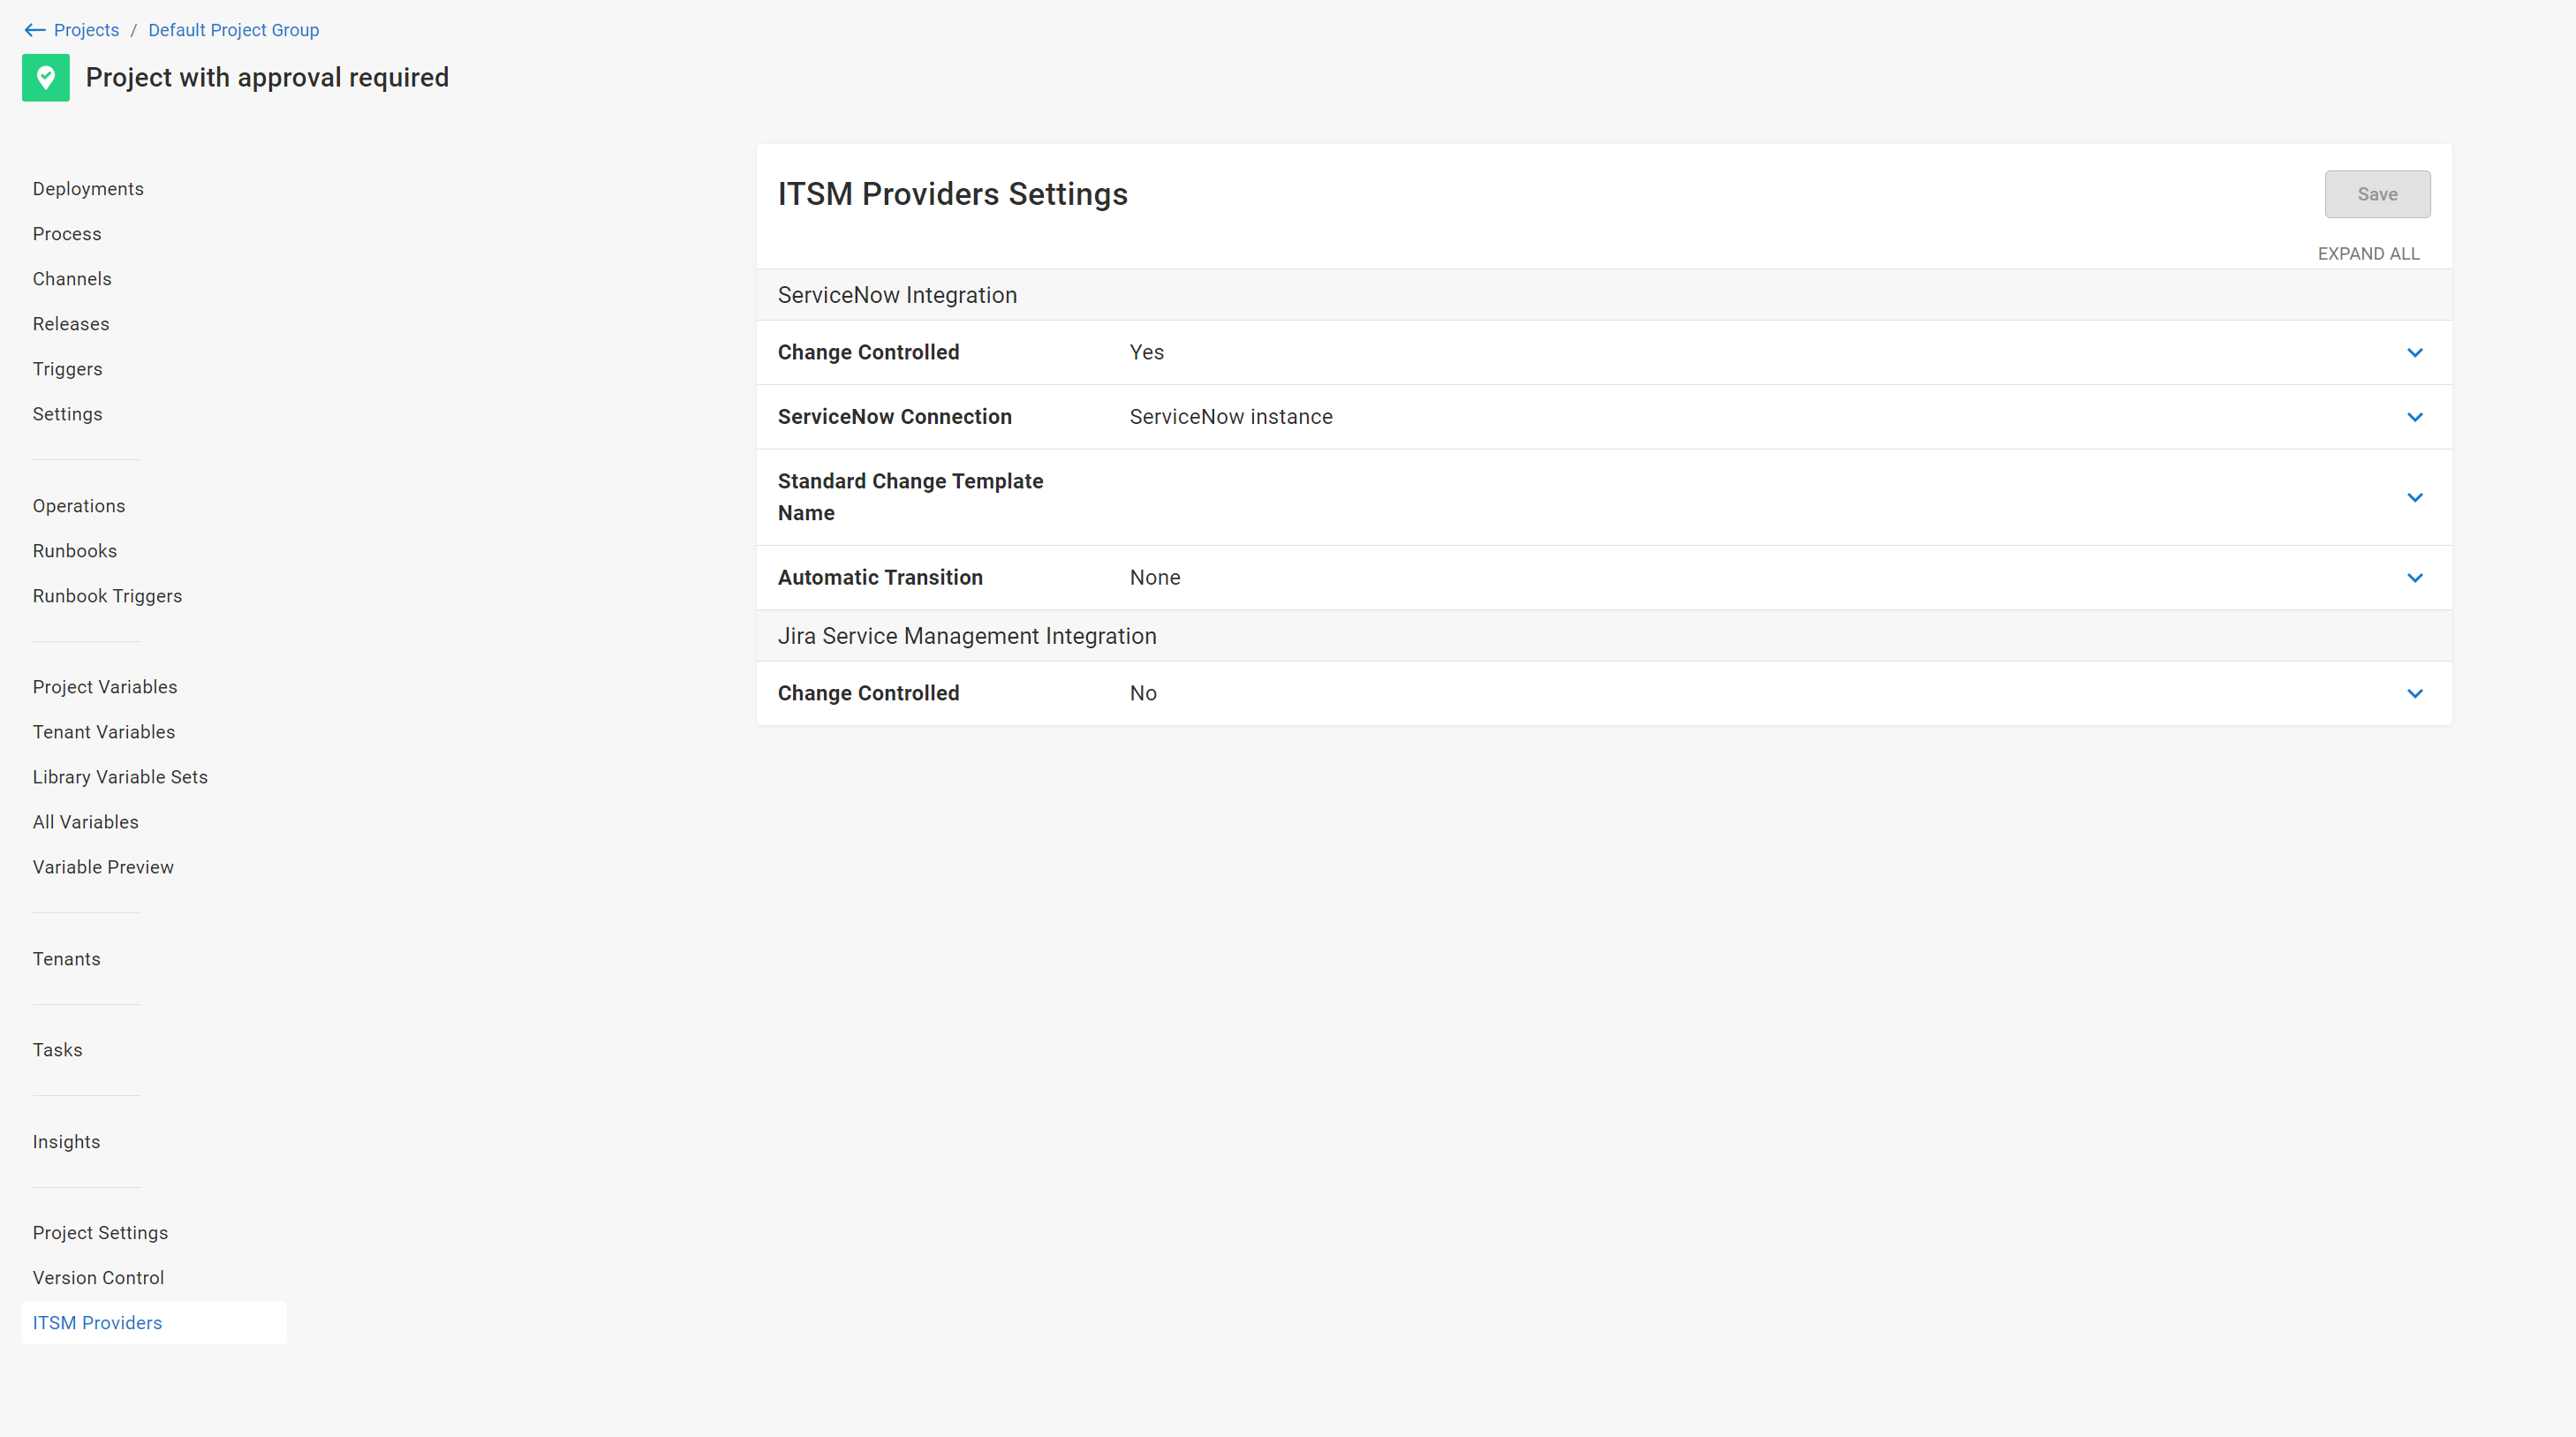 ServiceNow CD Audit Record project settings